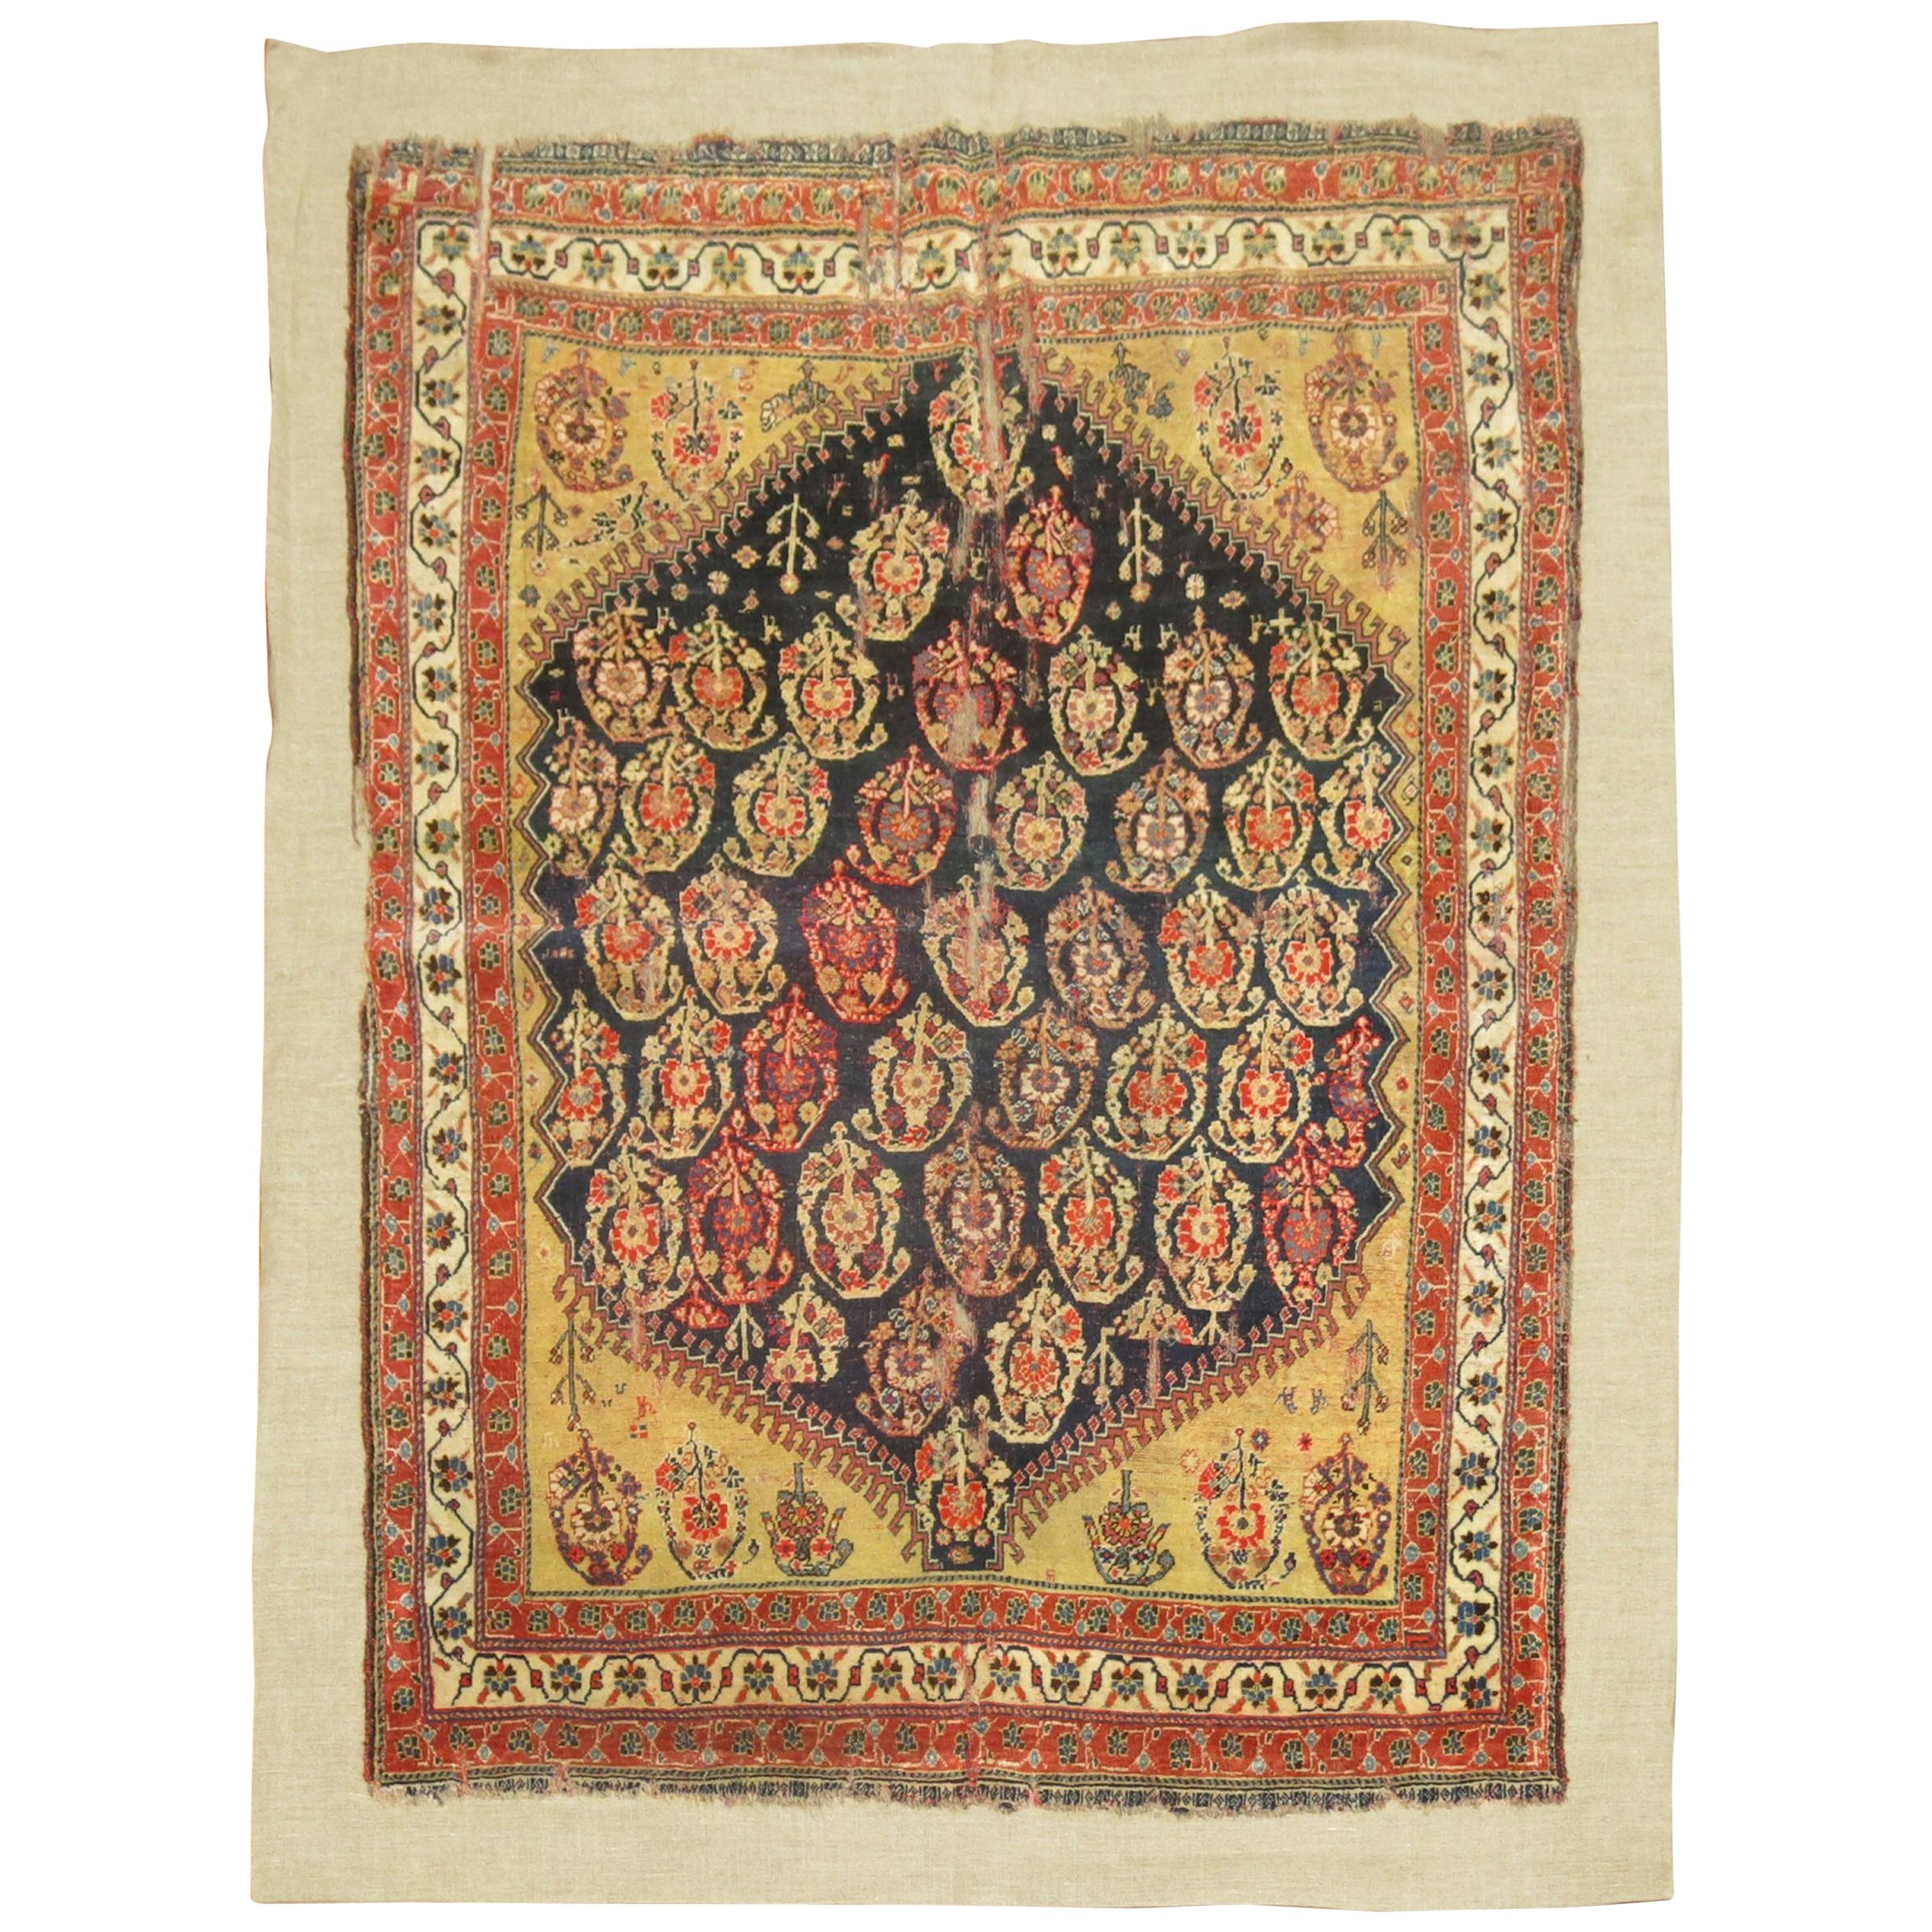 Antique Qashqai Rug Stitched on Linen For Sale